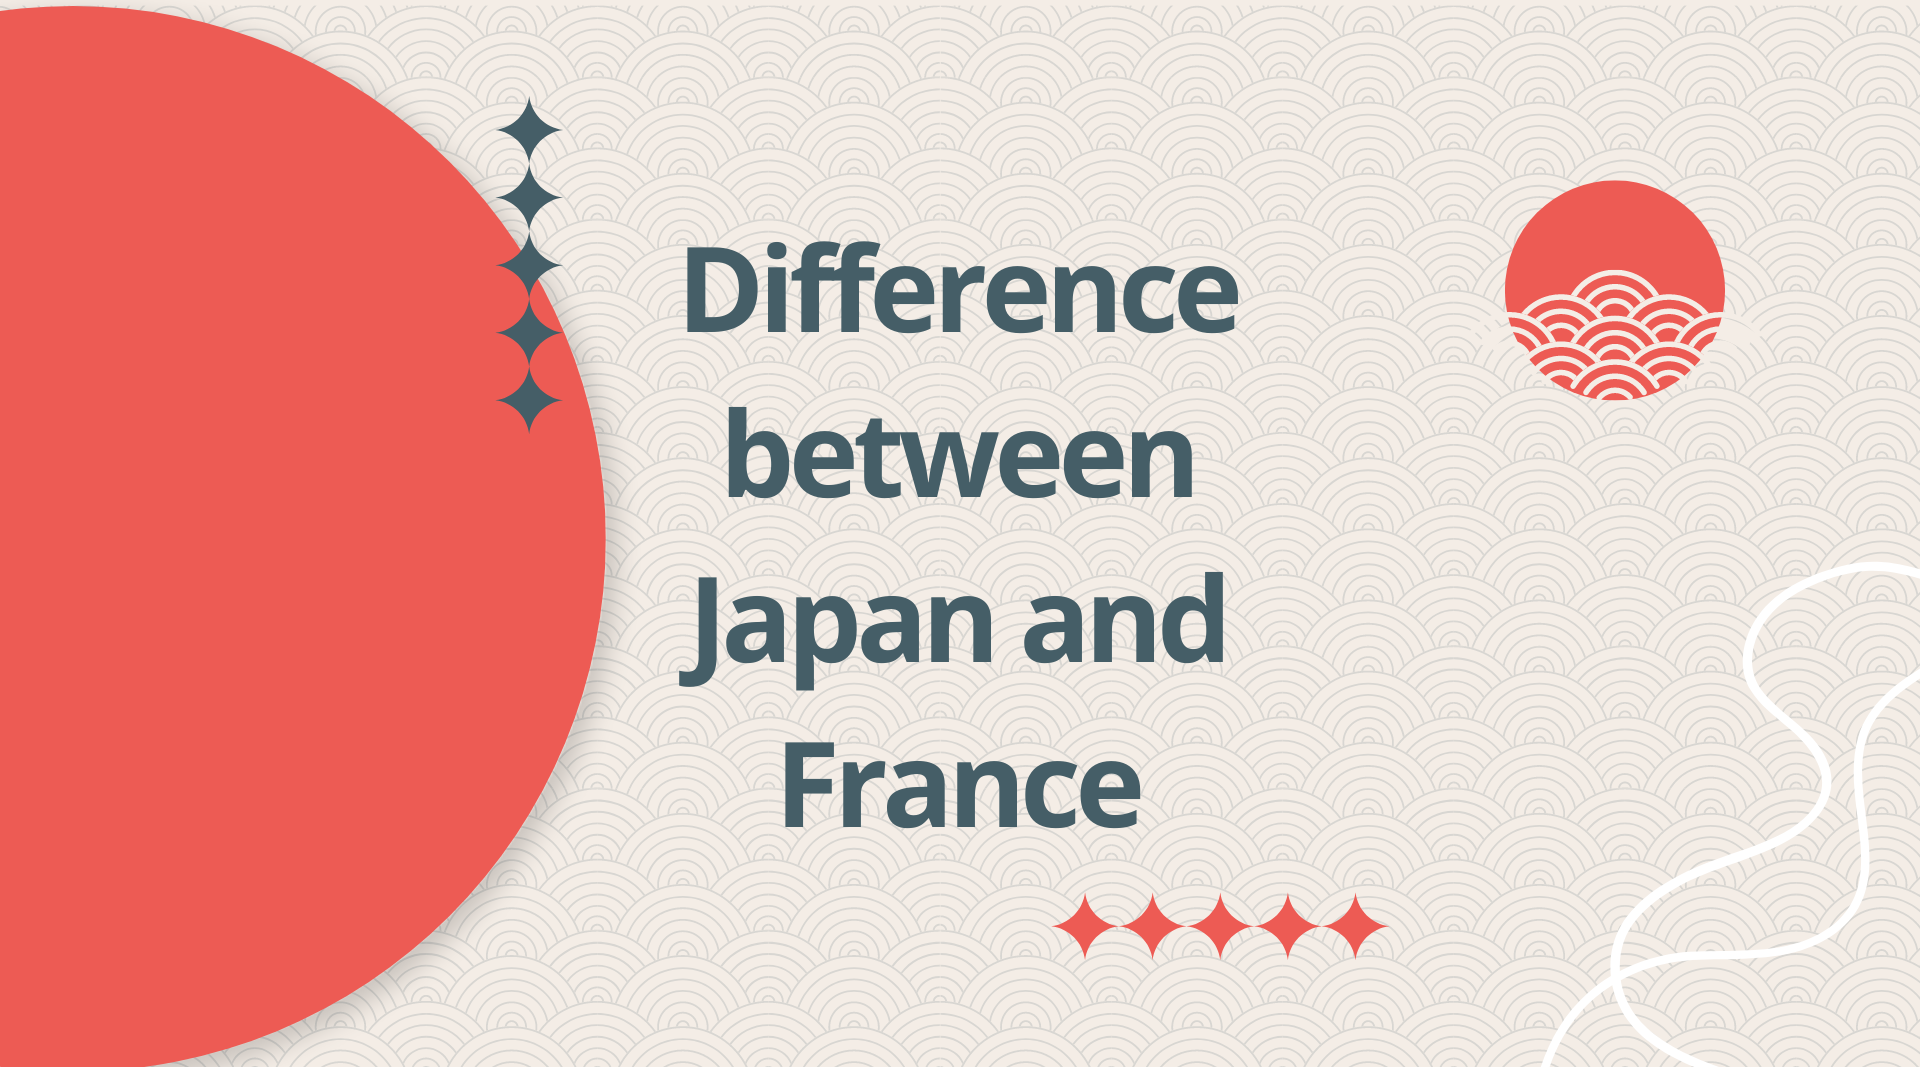 Difference between Japan and France